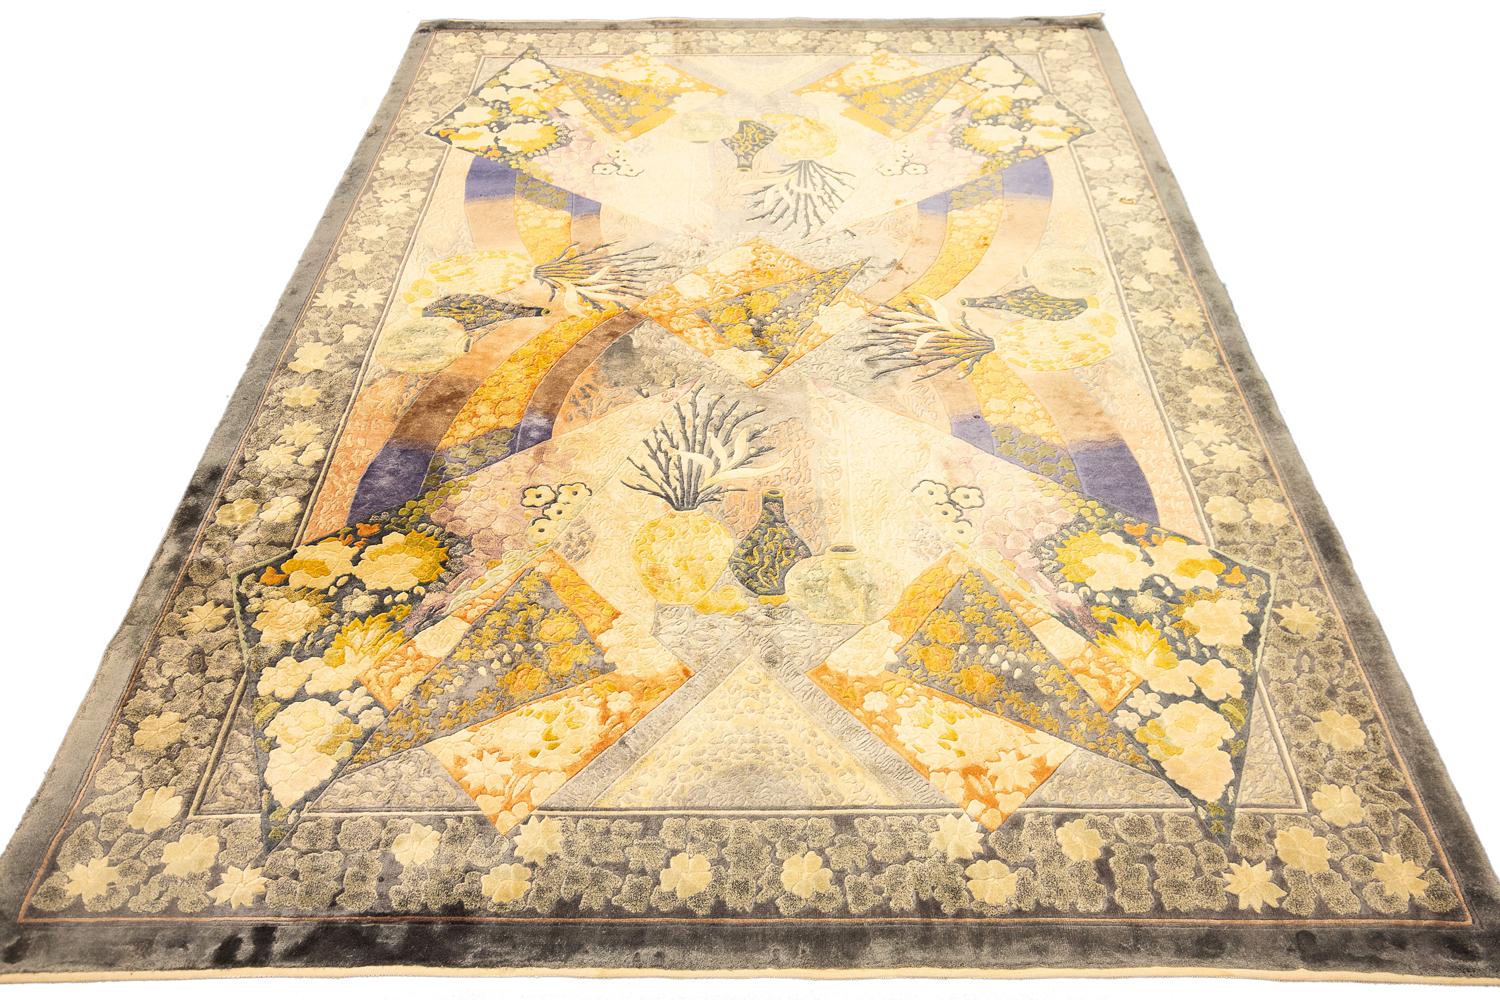 This is a semi-antique hand-knotted silk Chinese rug with an Art Deco design woven circa 1970 - 2000 and measures 241 x 167 CM in size. Its field is made with a combination of geometric panels which are decorated with floral motifs alongside